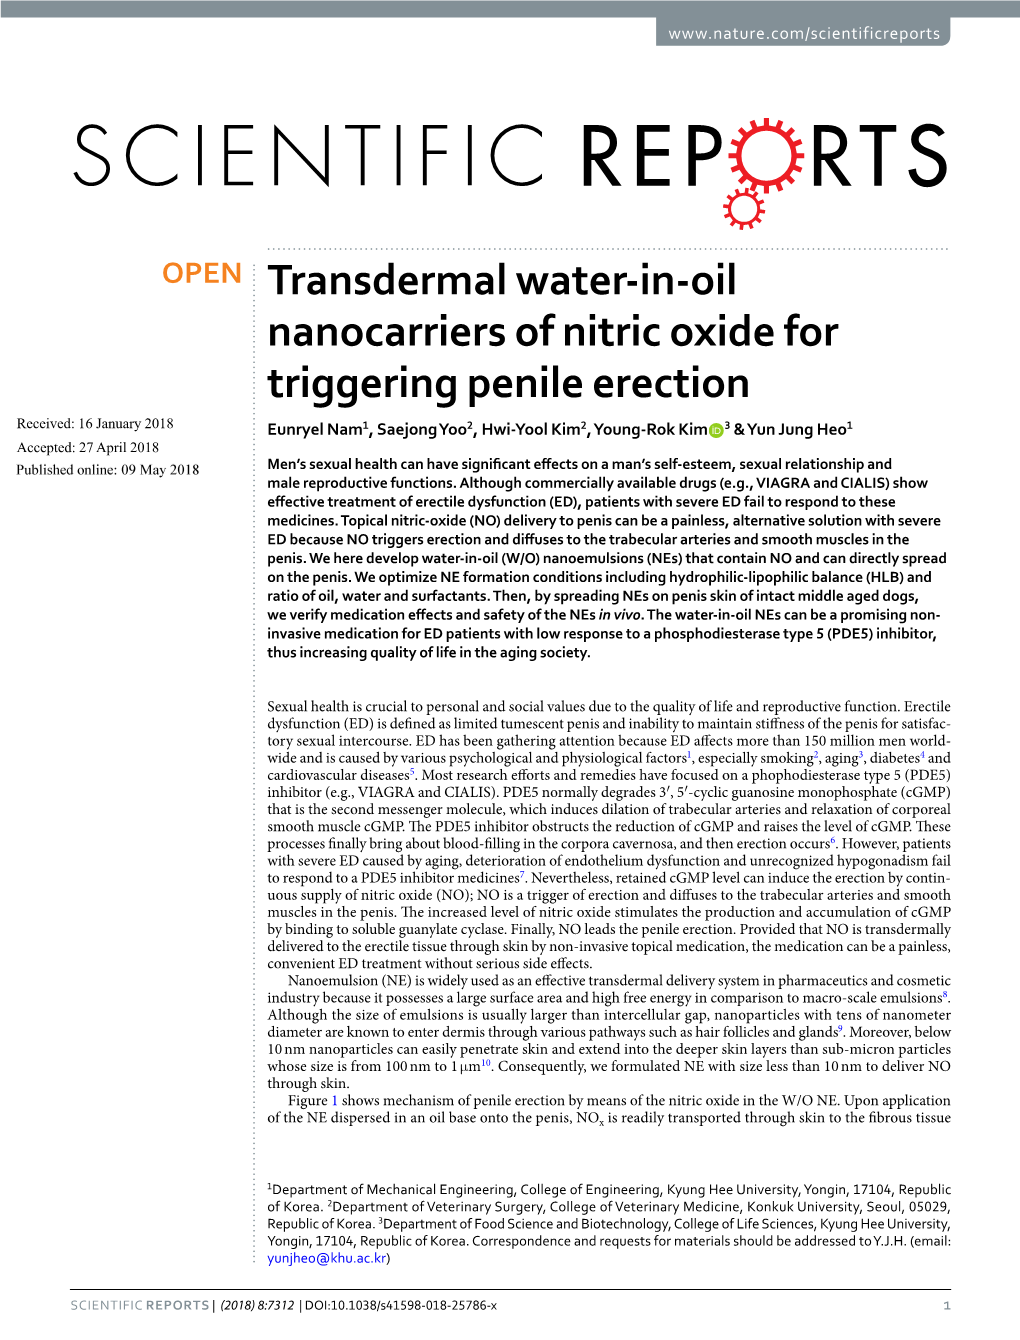 Transdermal Water-In-Oil Nanocarriers of Nitric Oxide for Triggering Penile